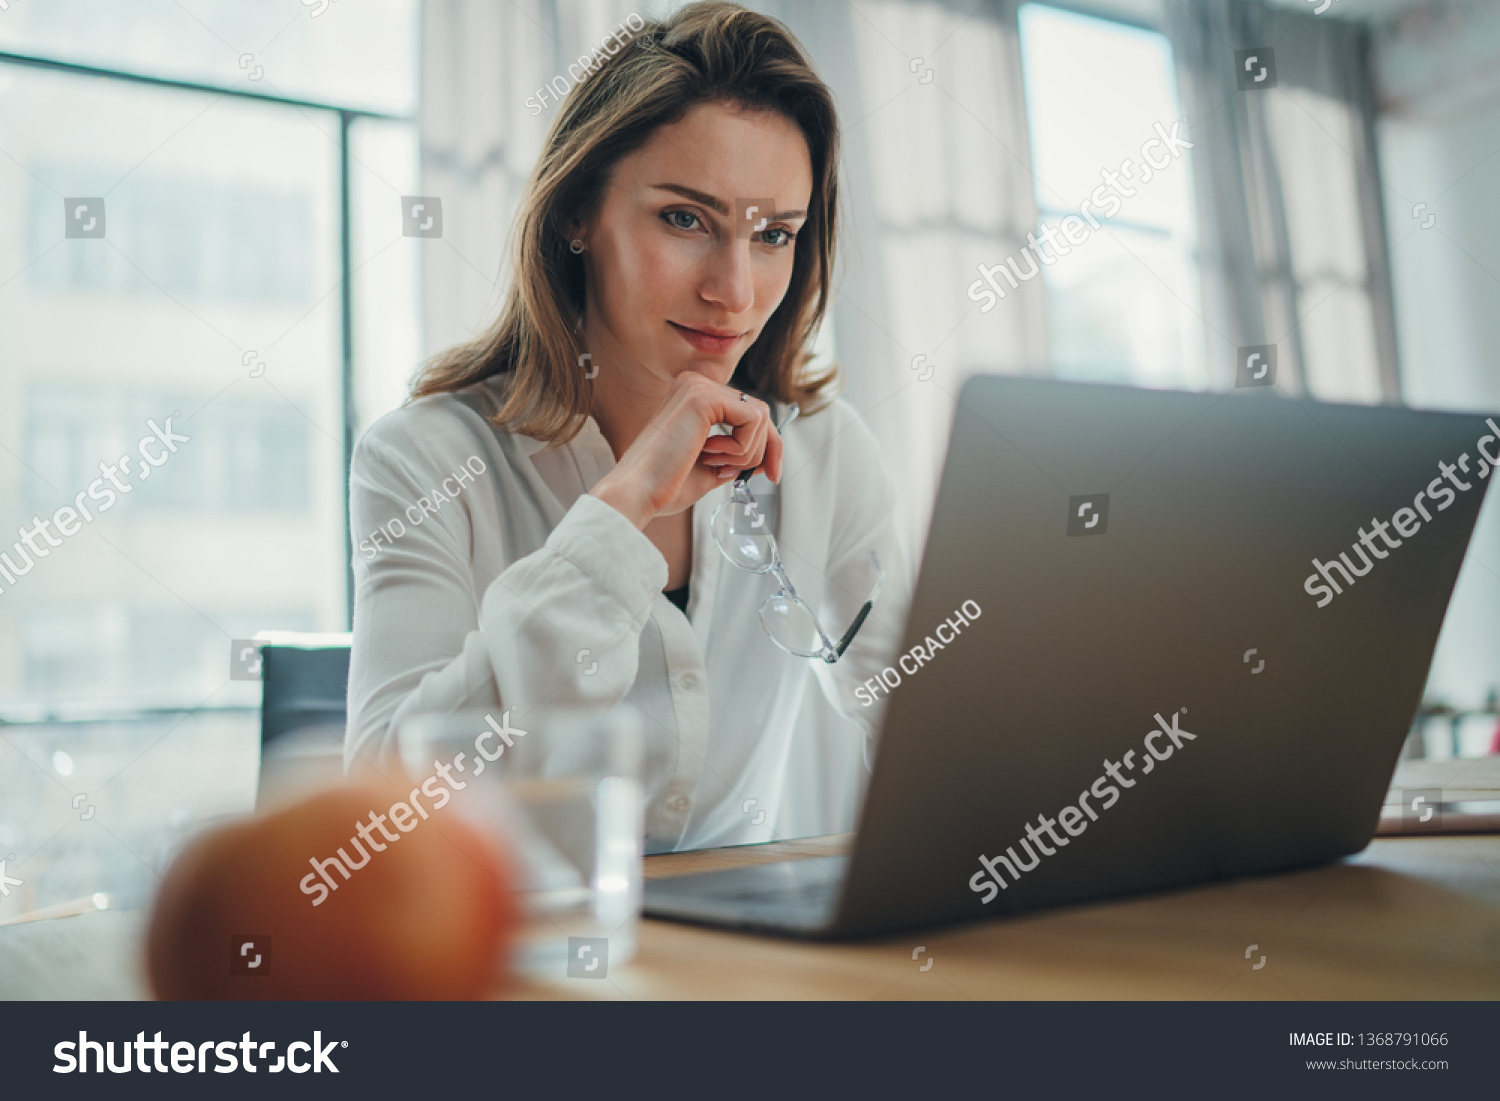 Handsome businesswoman working on laptop at her workplace at modern office.Blurred background #1368791066